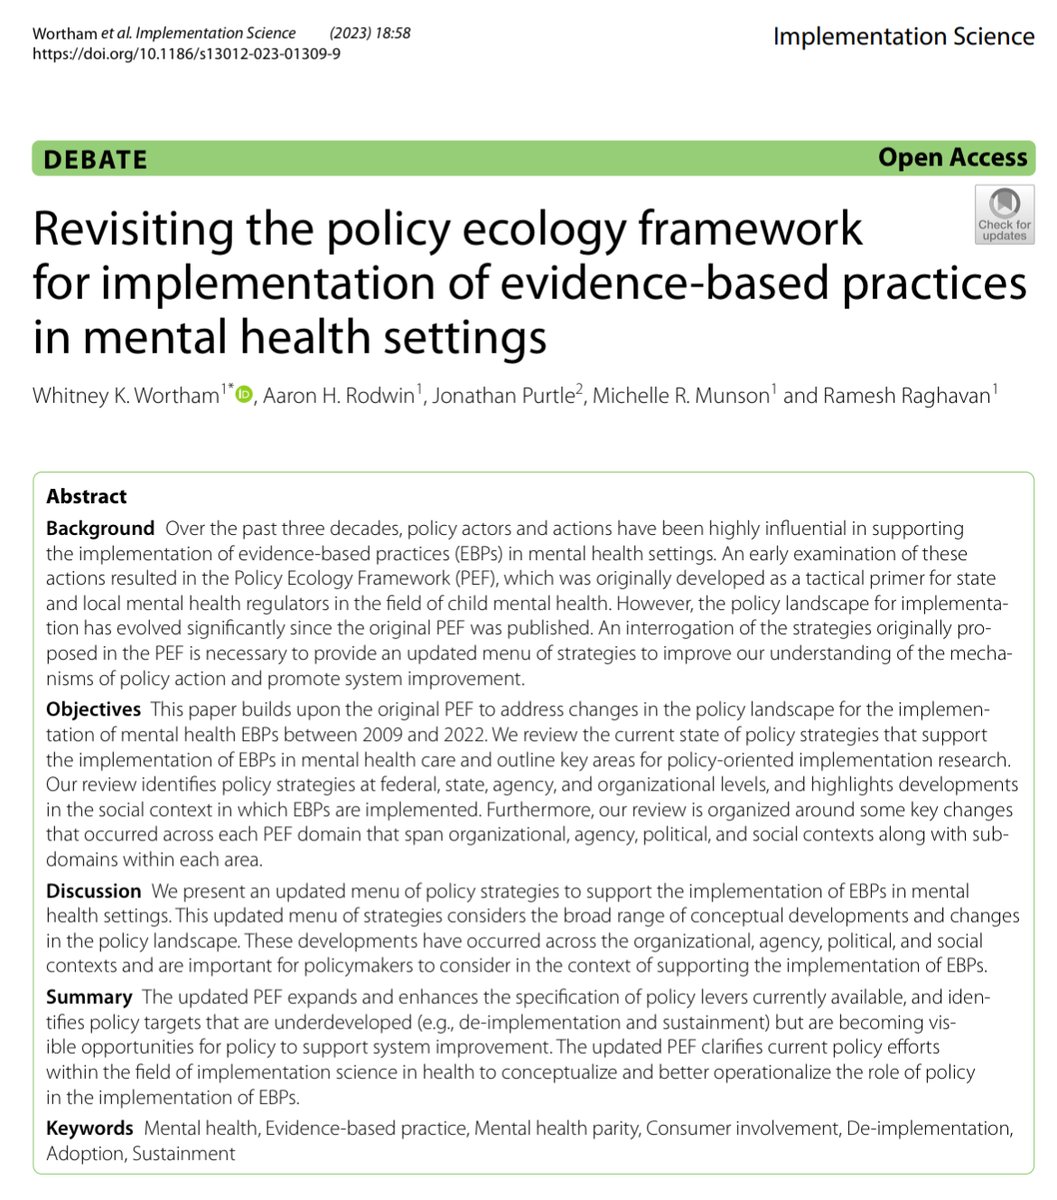 New paper led by Whitney Wortham on revisiting the policy ecology framework! We discuss updates to policy strategies that may support implementation of EBPs in mental health settings. @JonathanPurtle @MMunsonPhD Ramesh Raghavan @ImplementSci #PEF #ImpSci 
…plementationscience.biomedcentral.com/articles/10.11…